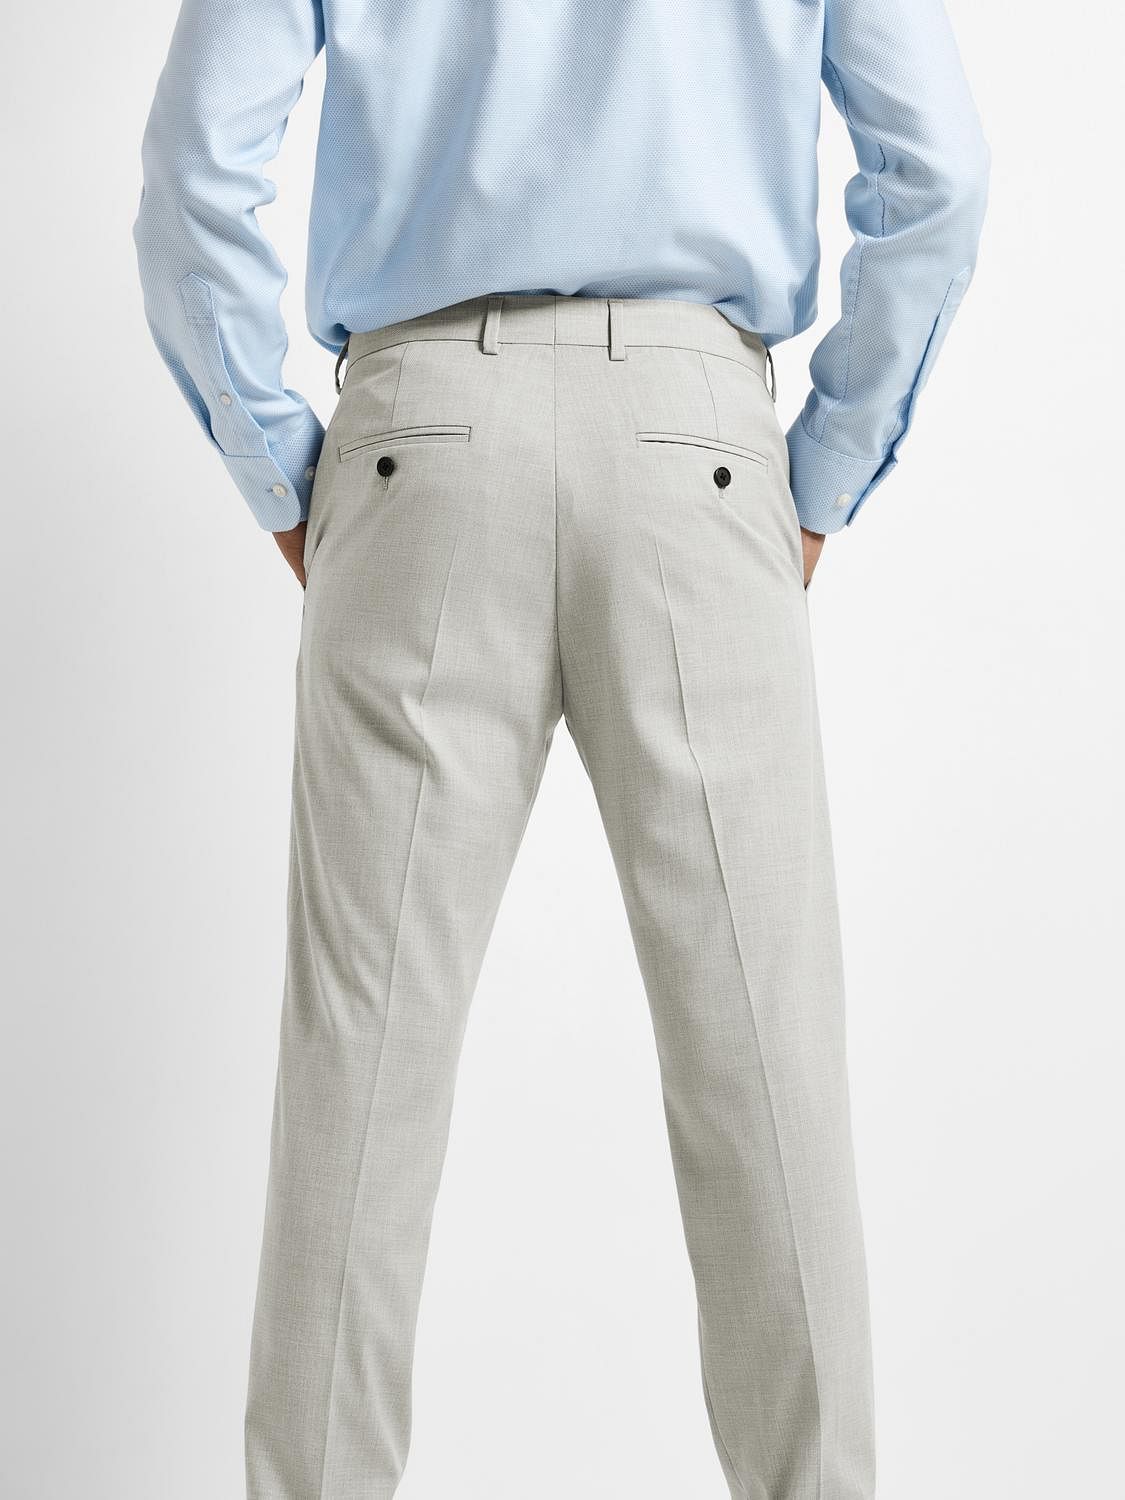 Buy Arrow Mid Rise Micro Check Formal Trousers - NNNOW.com